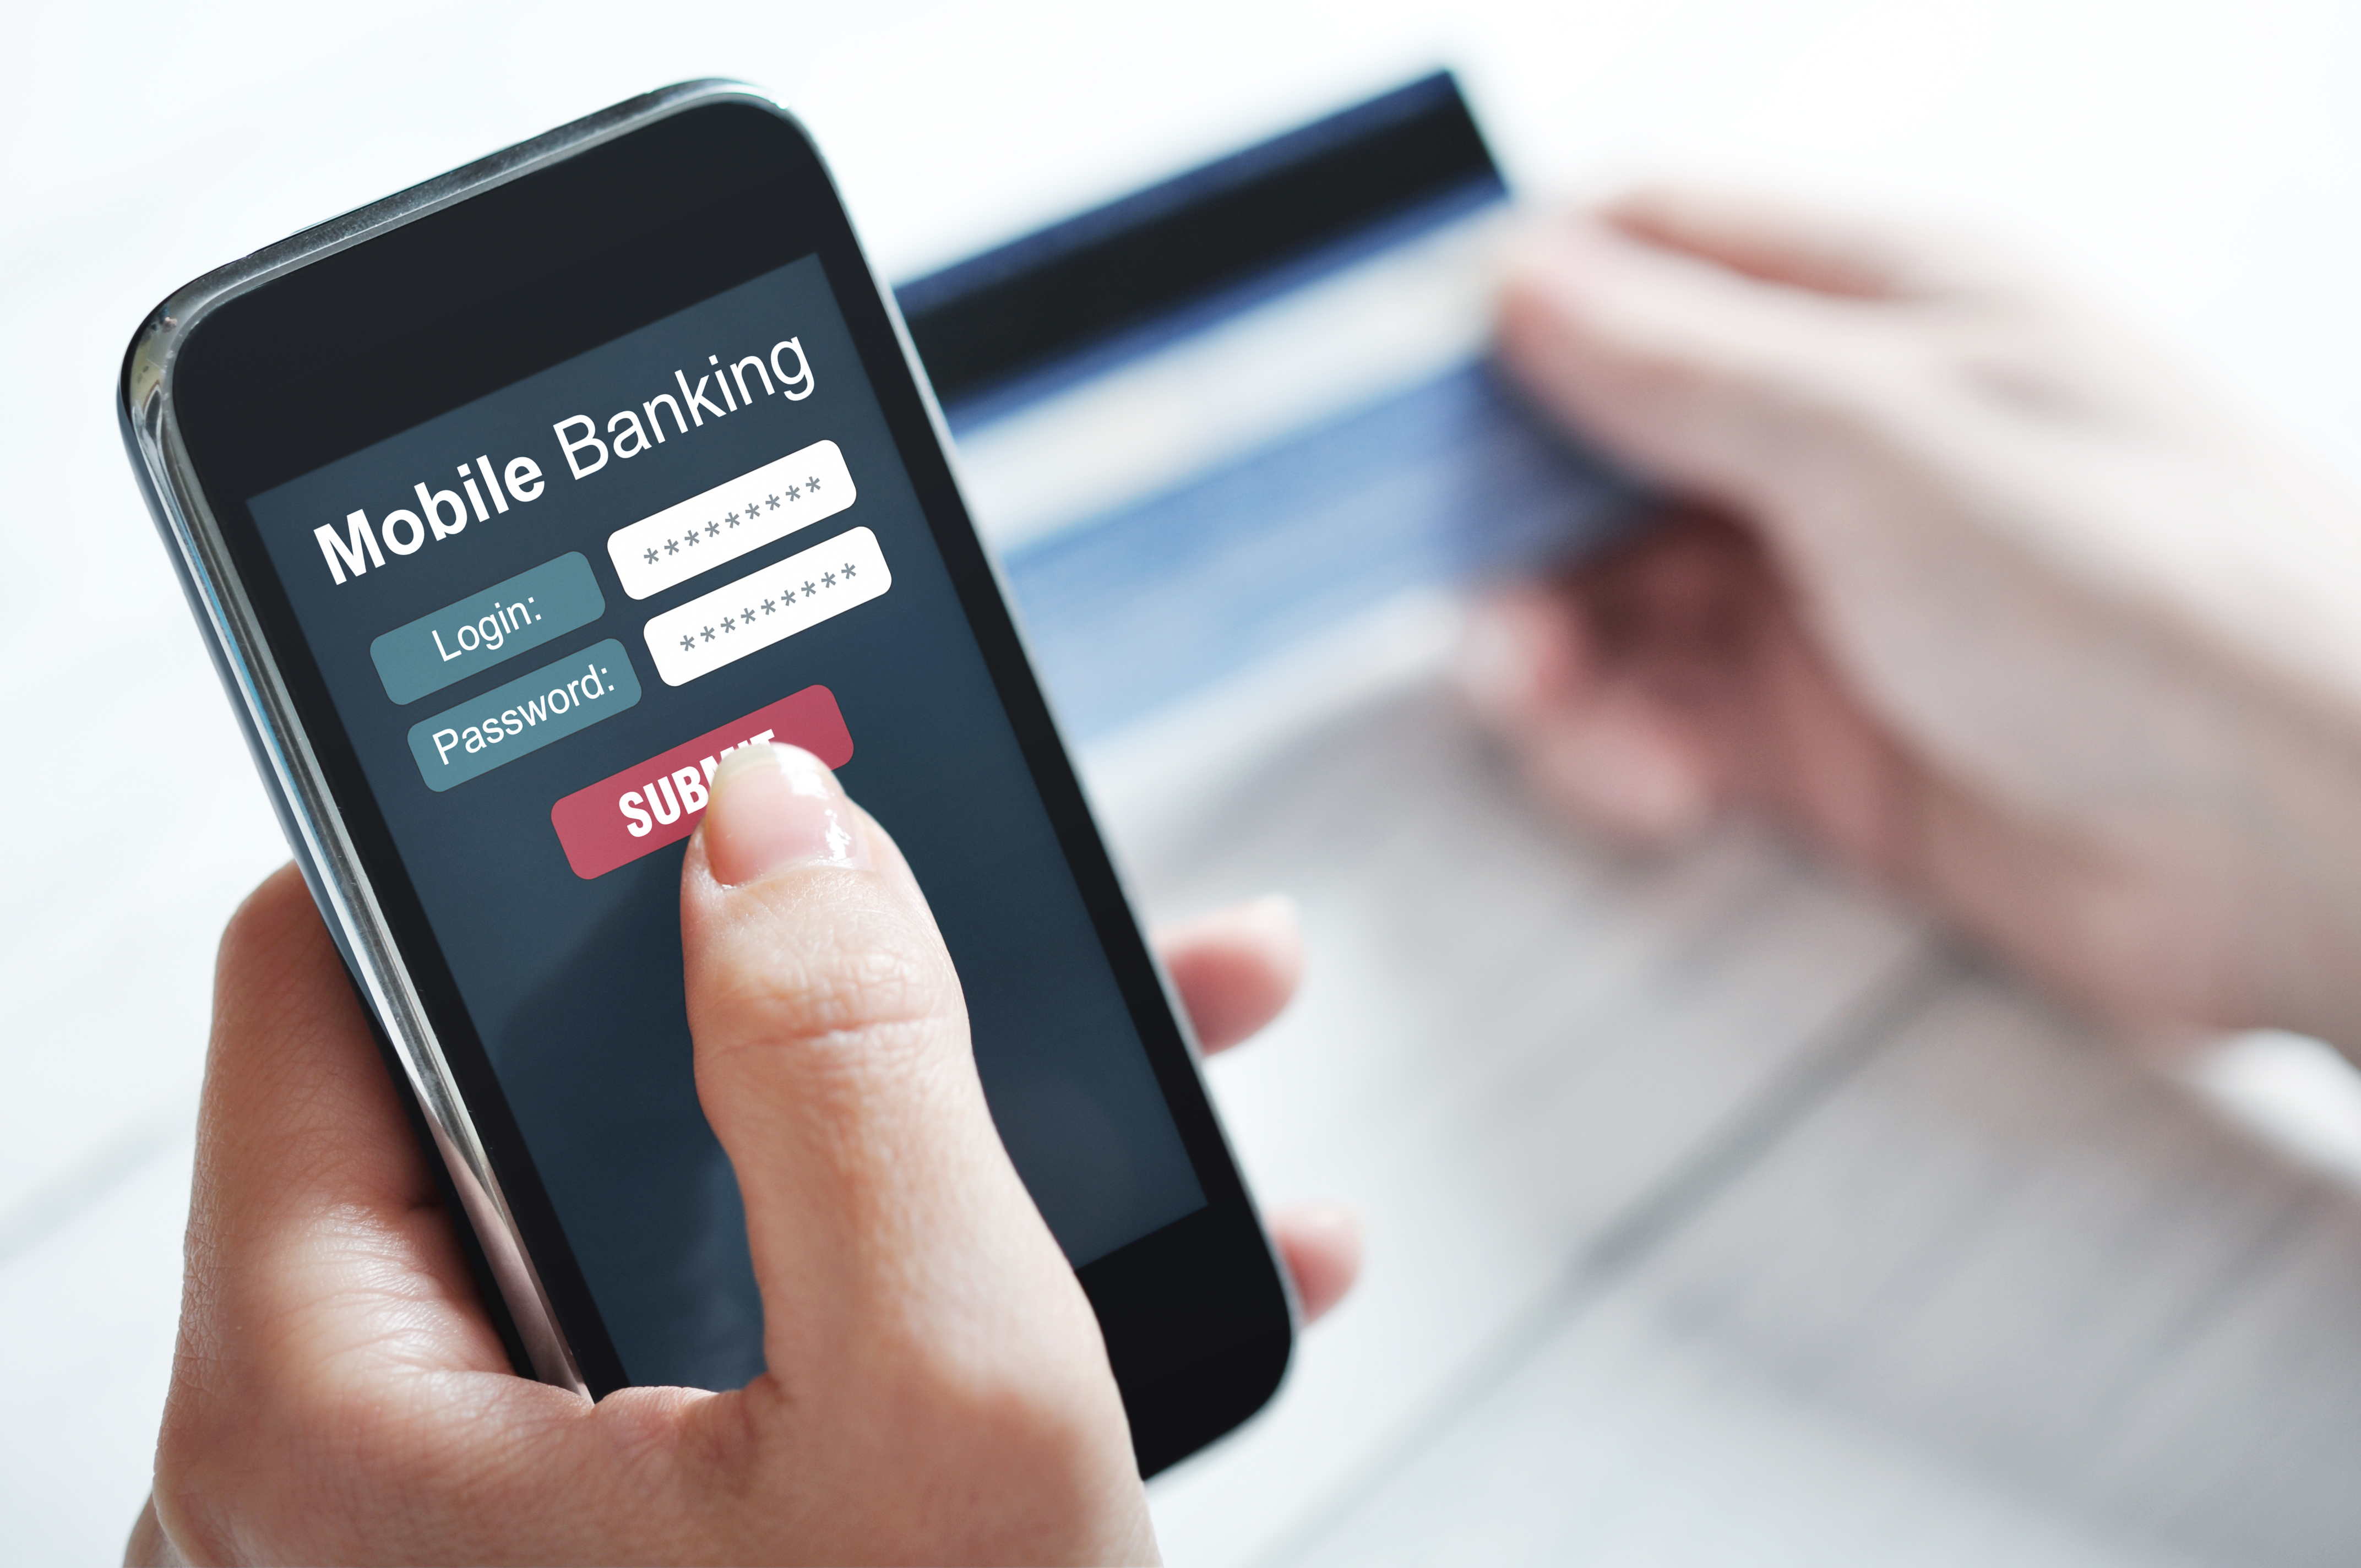 Mobile Banking technology